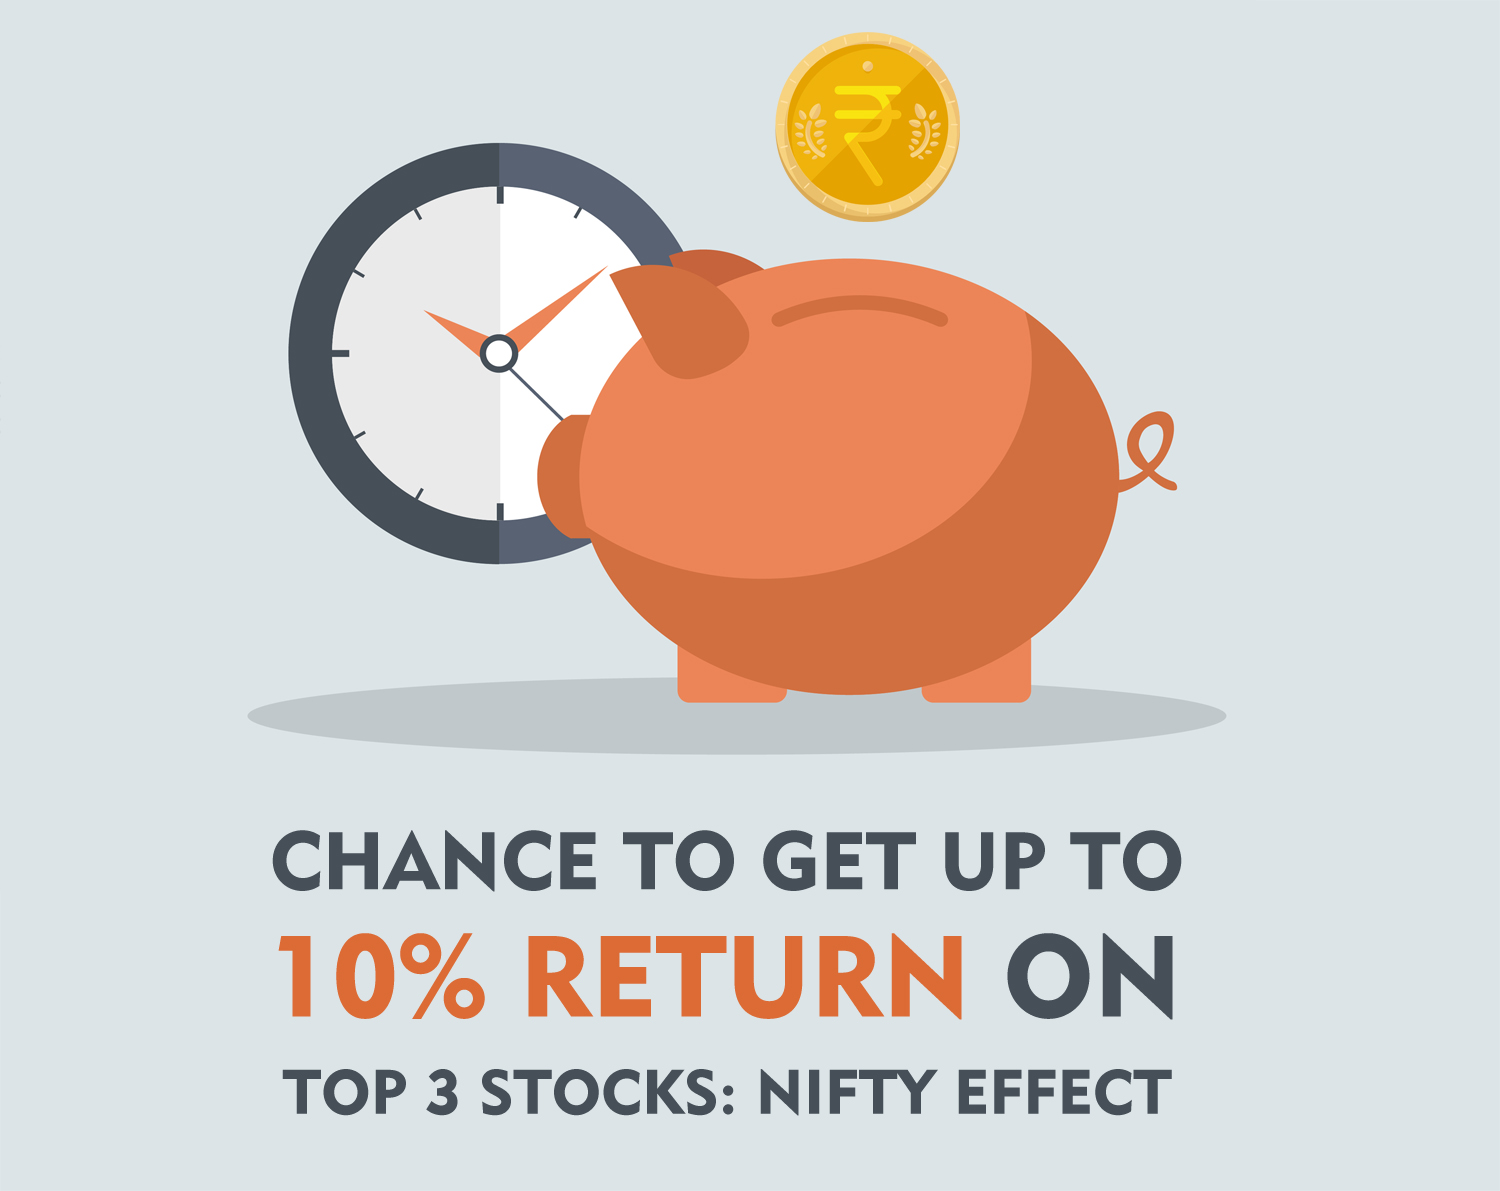 Grab the Chance to get Up to 10% Return on These Top 3 Stocks: Nifty Effect